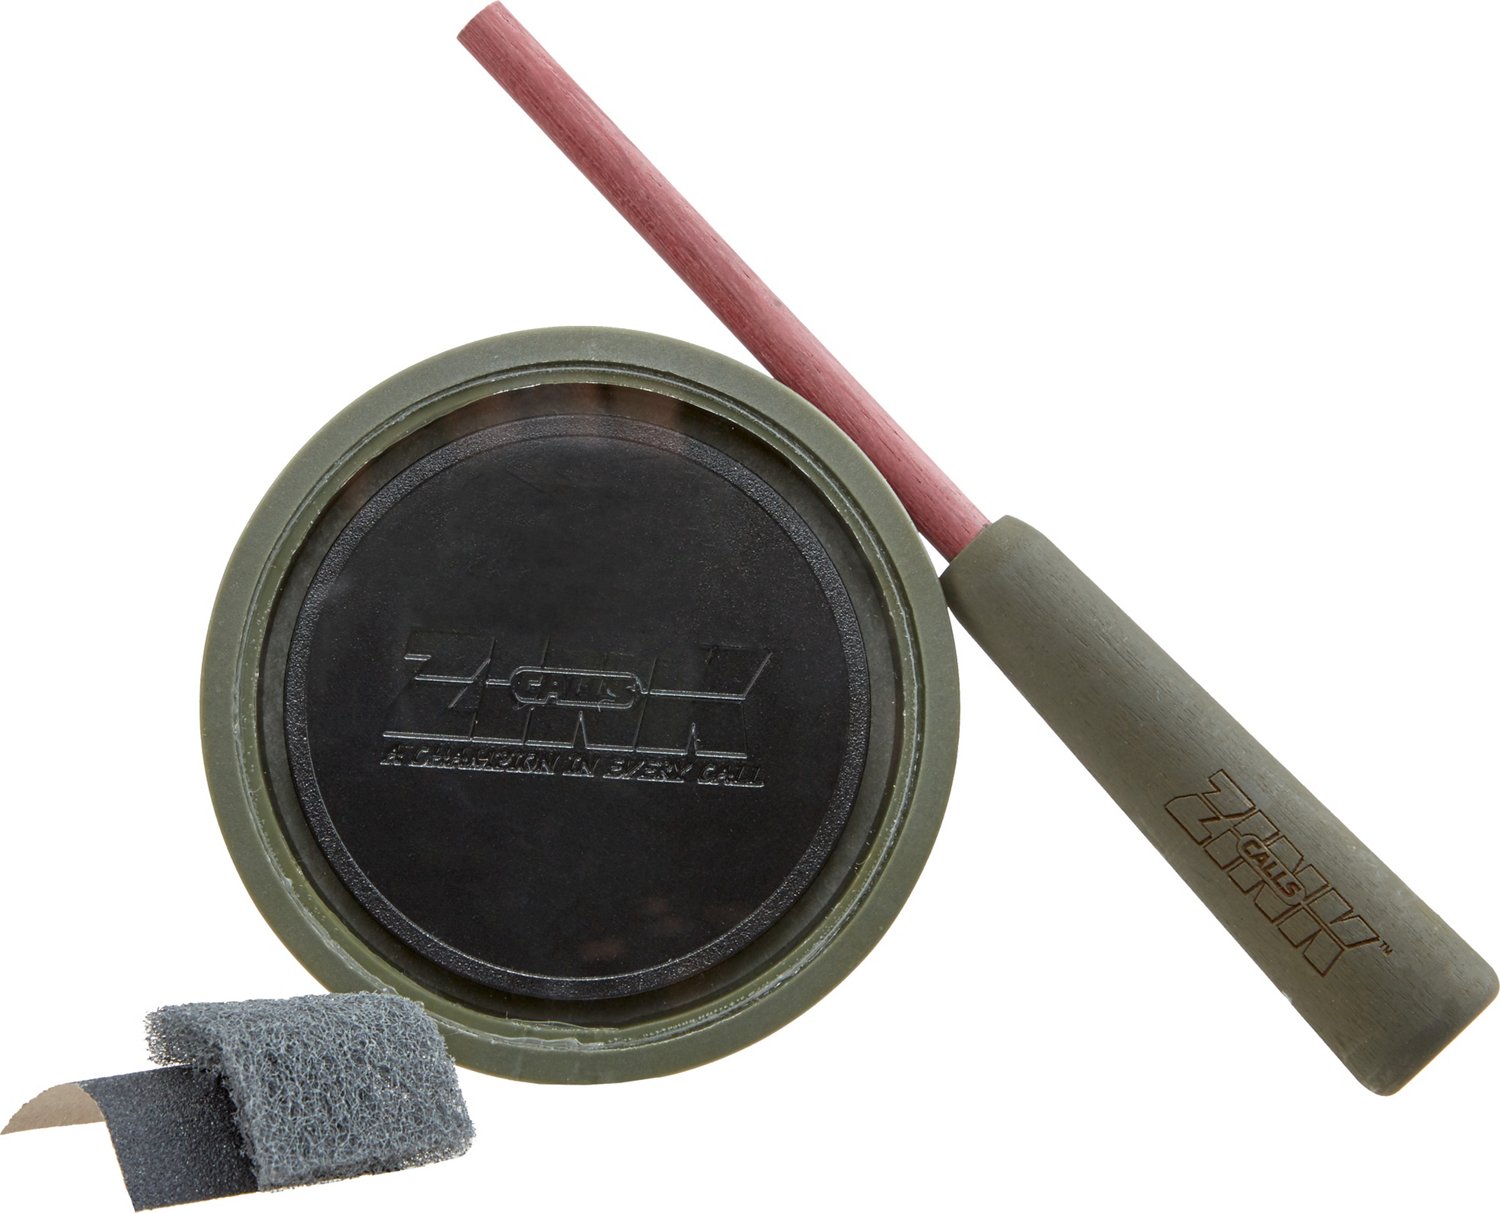 Zink Calls 303 Thunder Ridge Hunting Game Slate Friction Turkey Call for sale online 